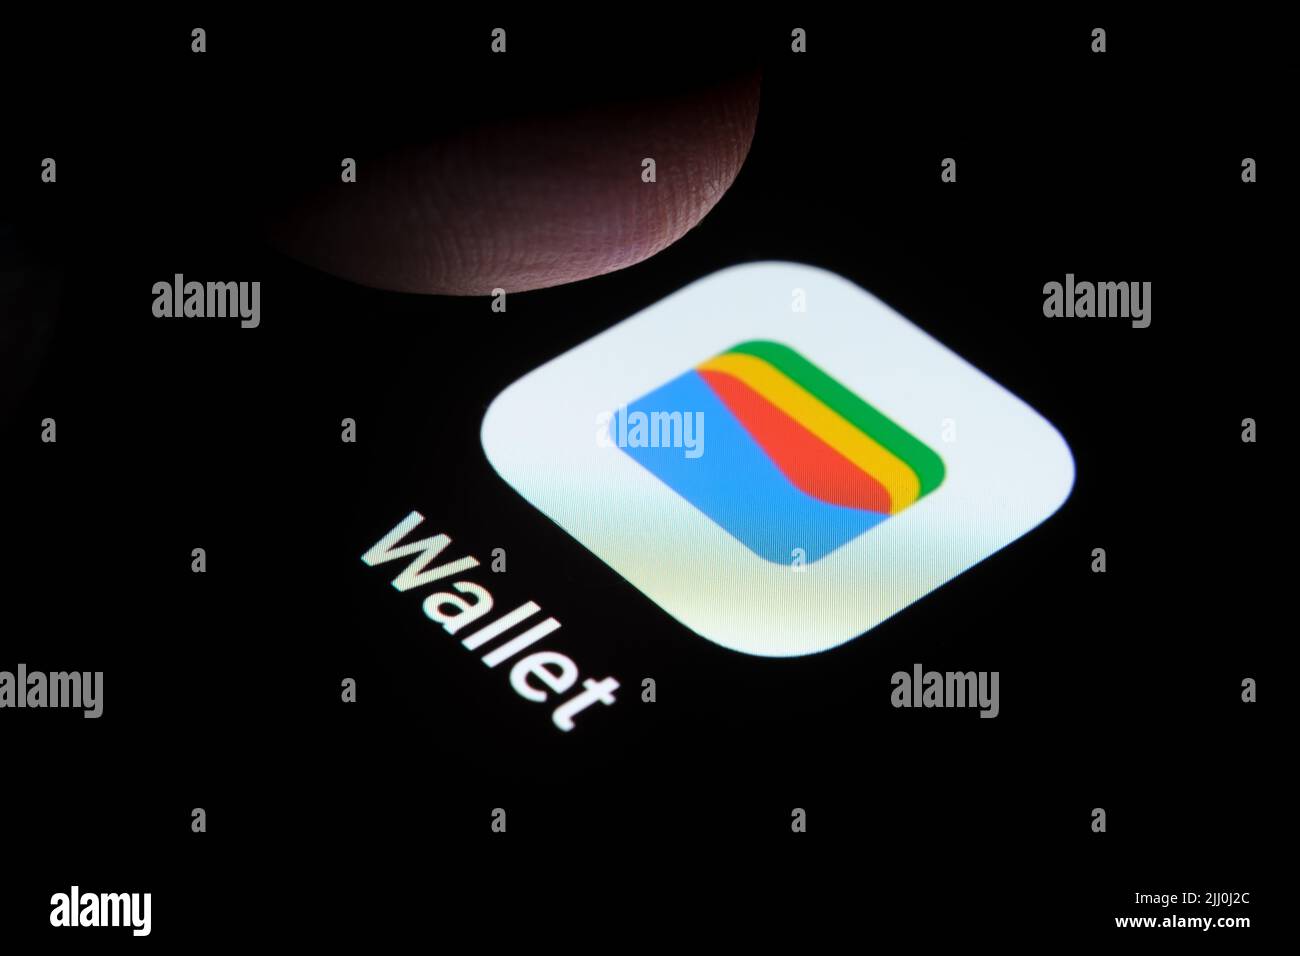 New Google Wallet app seen on the screen of smartphone and finger tip above it. Google Pay rebranded to Google Wallet. Stafford, United Kingdom, July Stock Photo